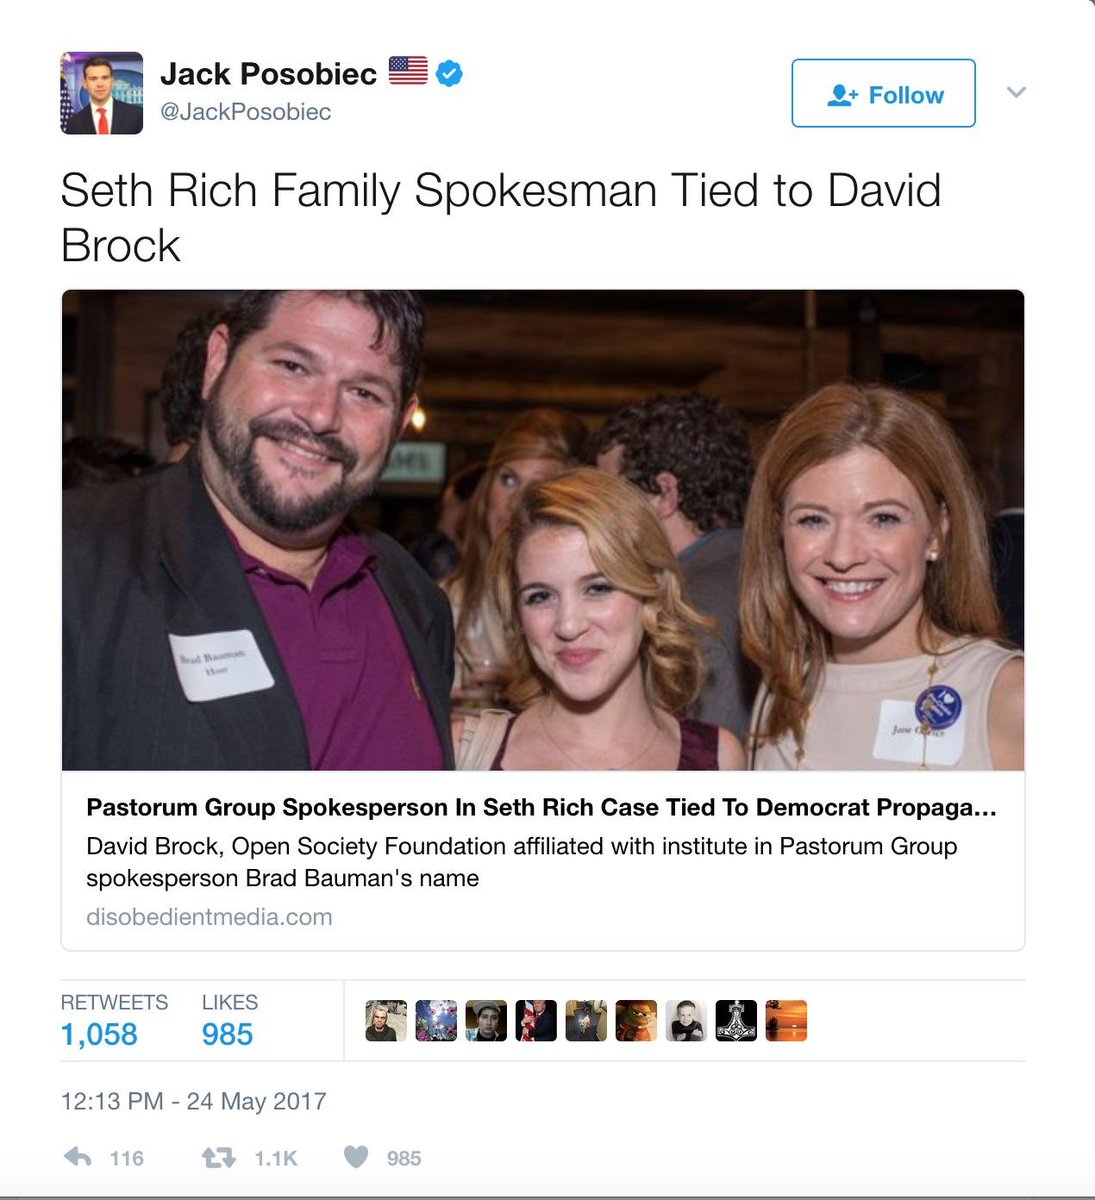 One of the many debunked conspiracy theories that Jack has pushed was the idea that Seth Rich was murdered by the Clintons for leaking DNC emails https://www.phillymag.com/news/2017/09/16/jack-posobiec-trump-fake-news/?amp=1